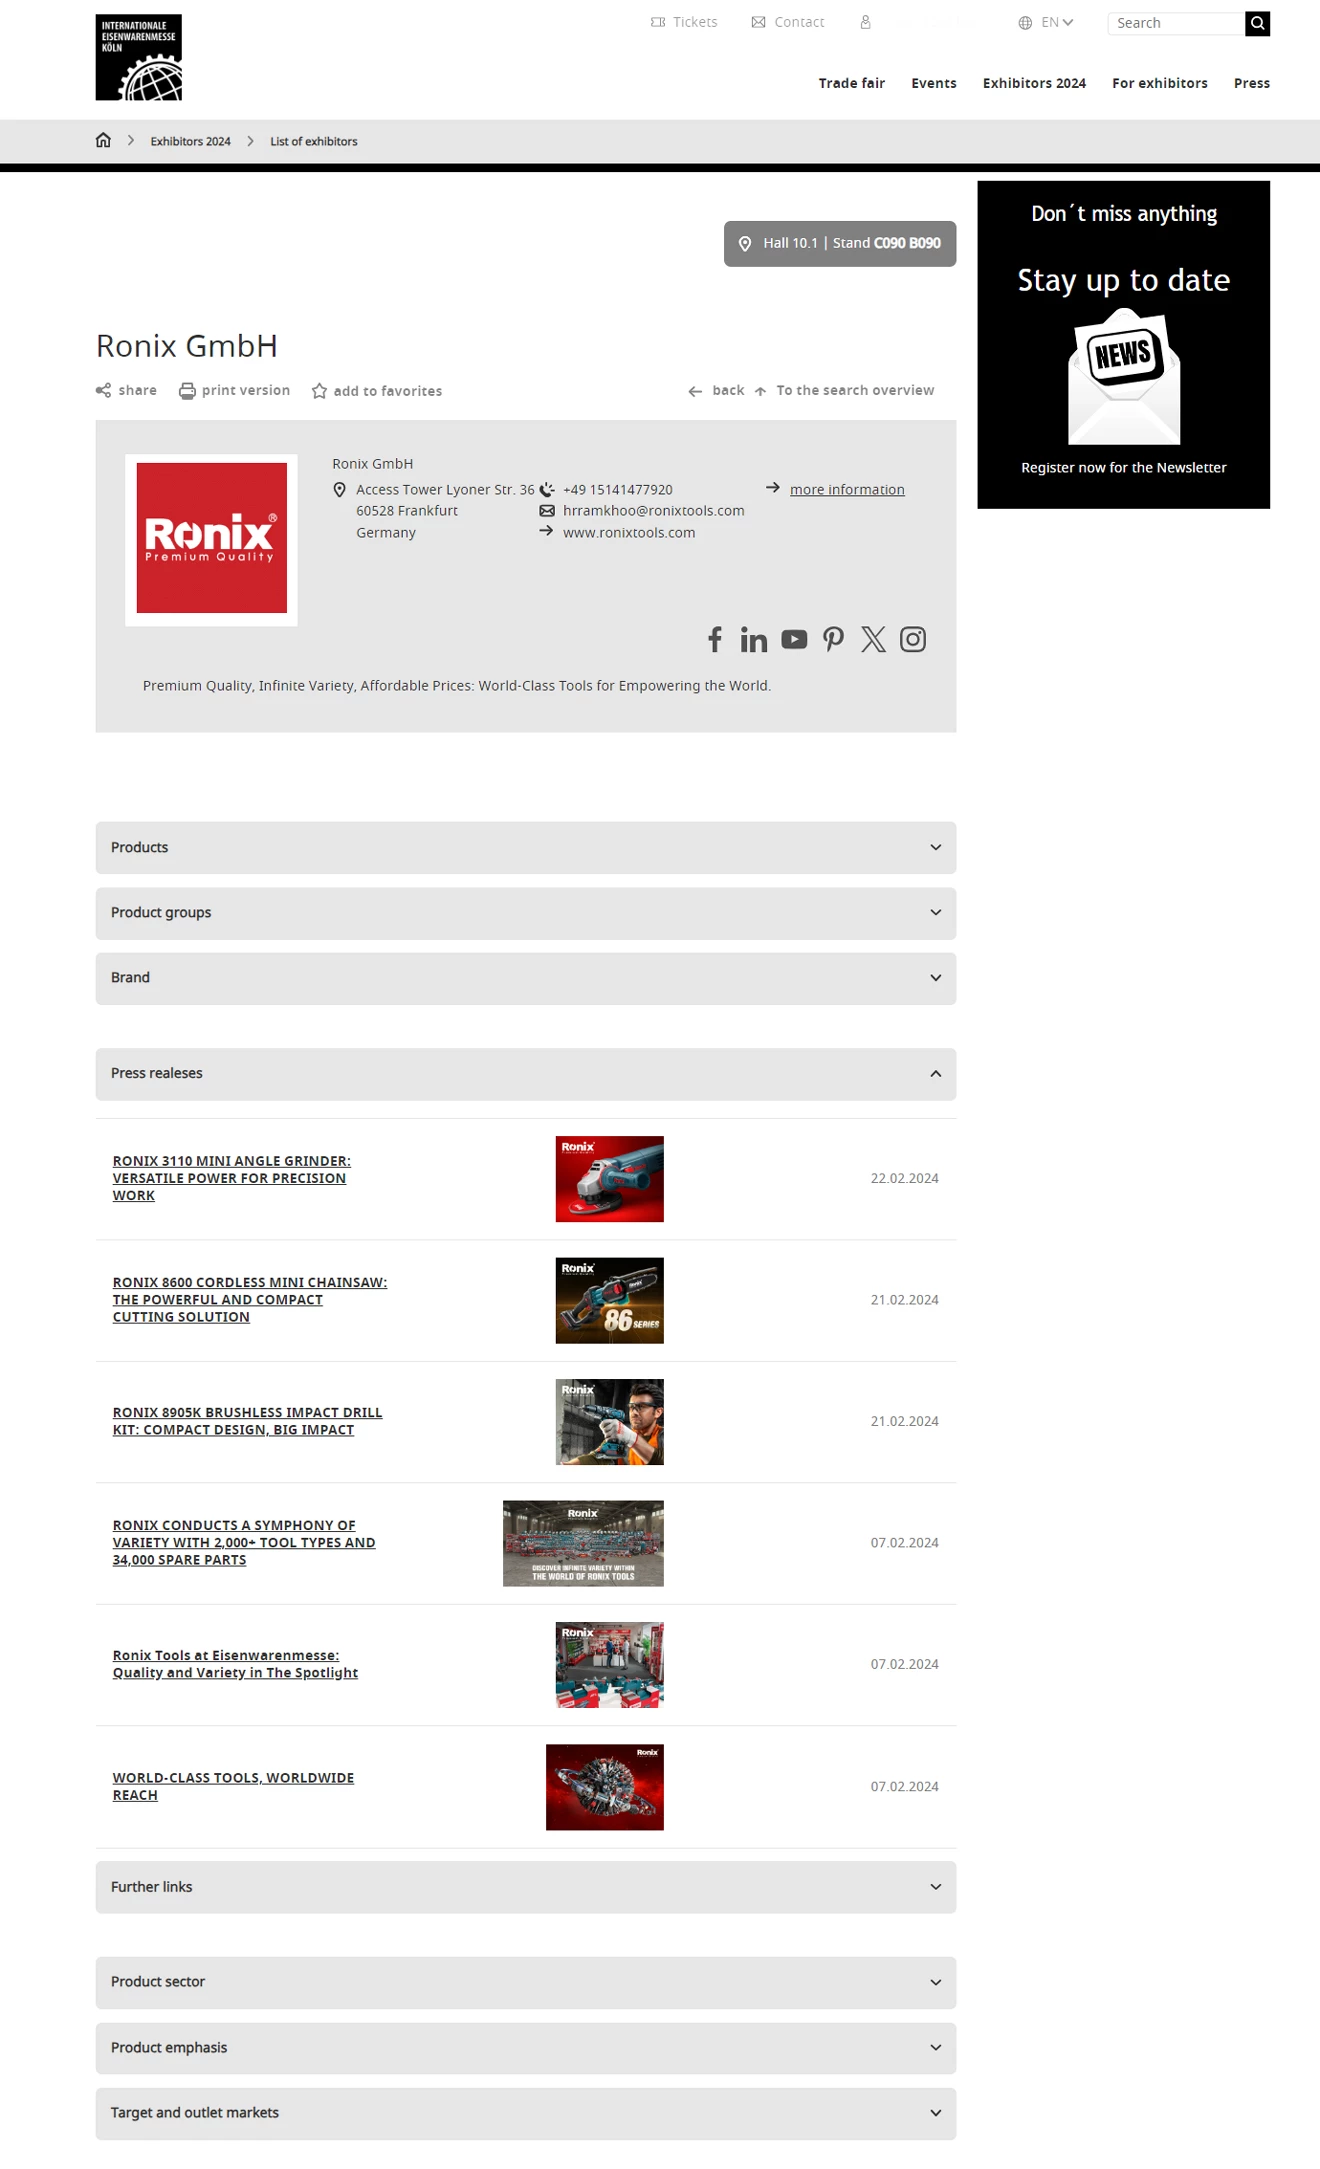 A screenshot of Ronix Tools profile on Eisenwarenmesse website